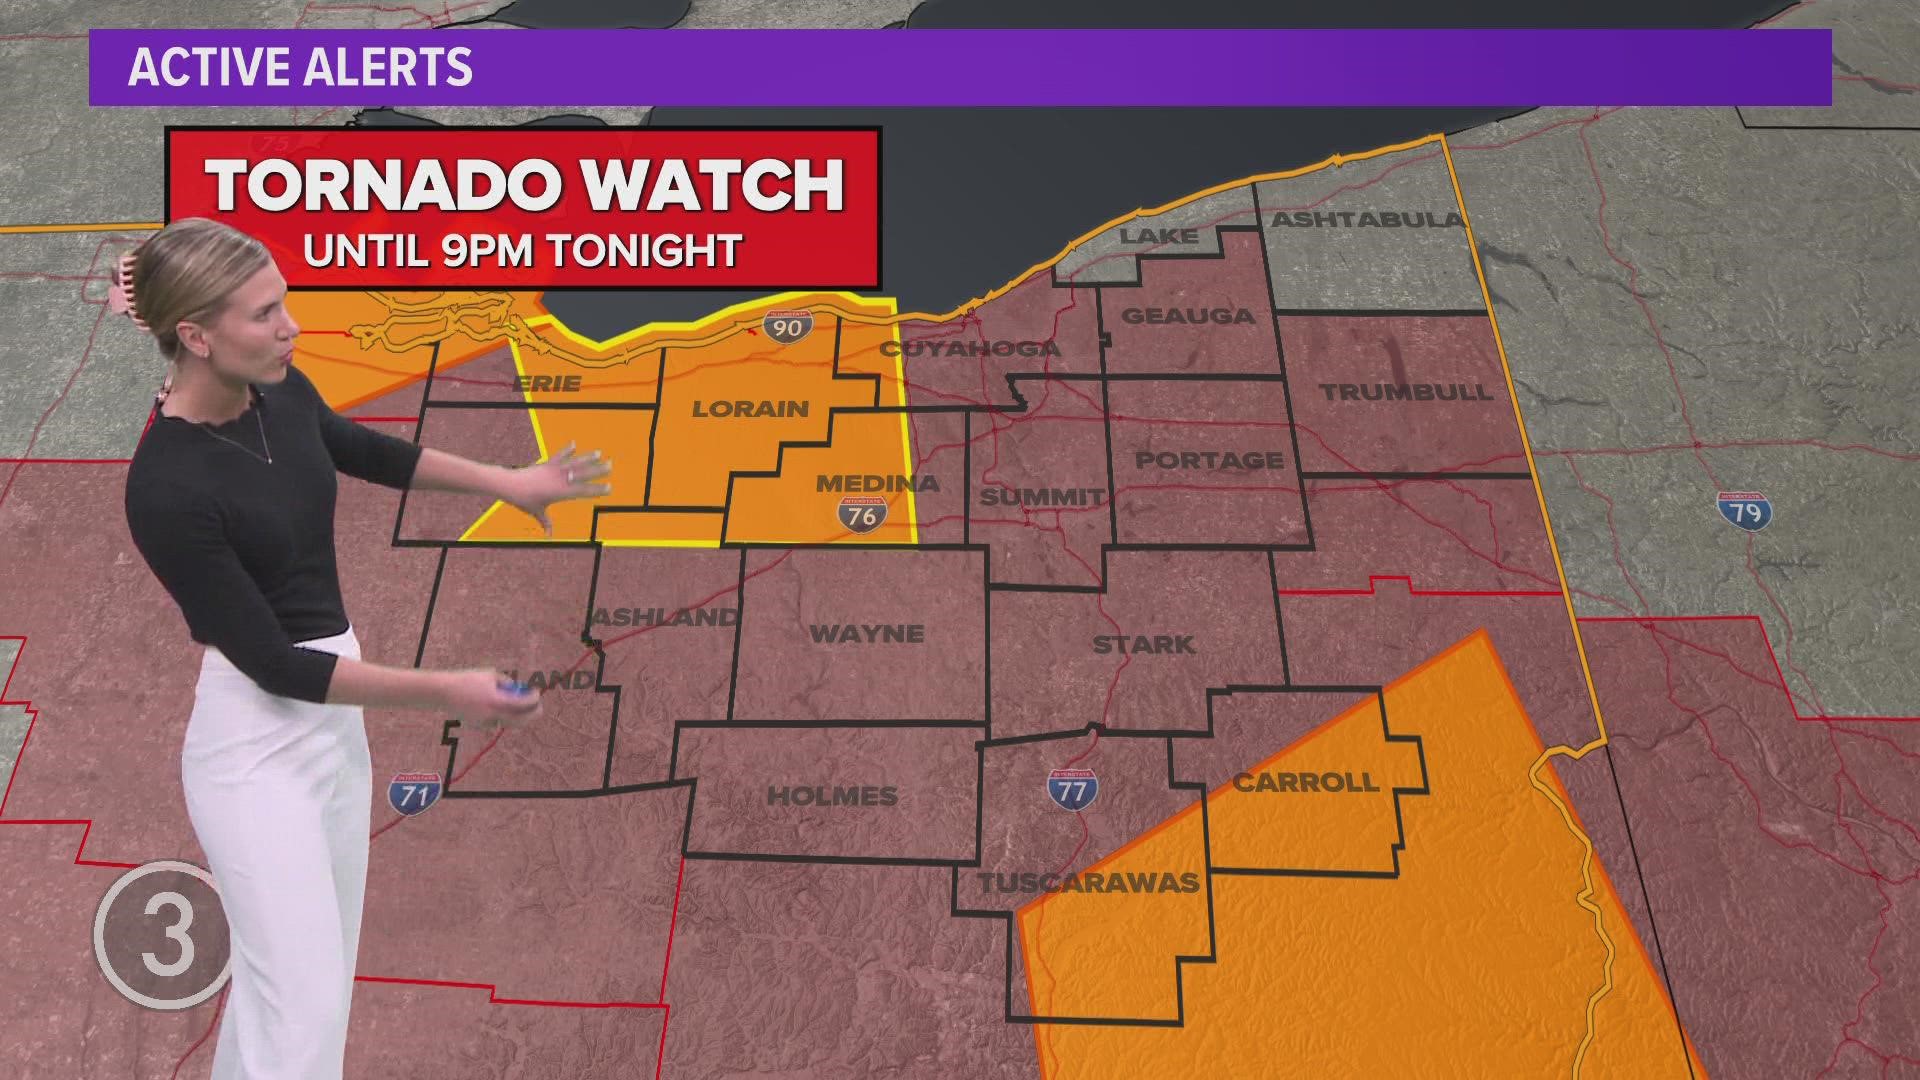 Most of Northeast Ohio is under a Tornado Watch through 9 p.m. this evening.